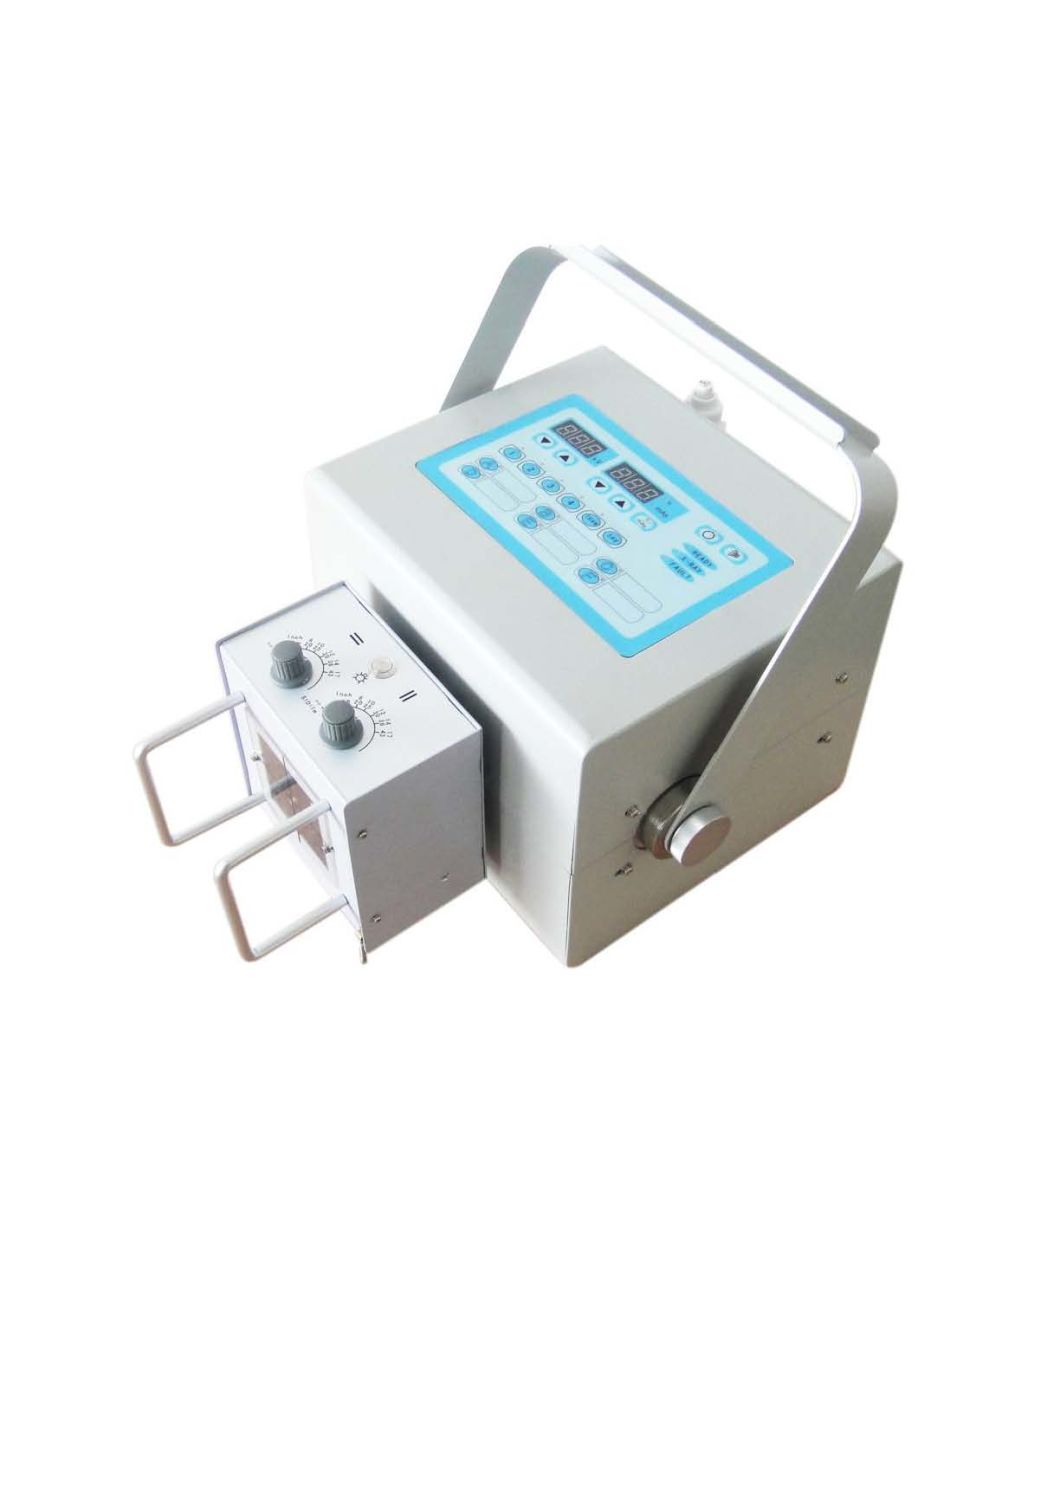 4kw Digital Portable High Frequency X Ray Machine with Advanced Flat Panel Detector and Droc Software Mslpx01